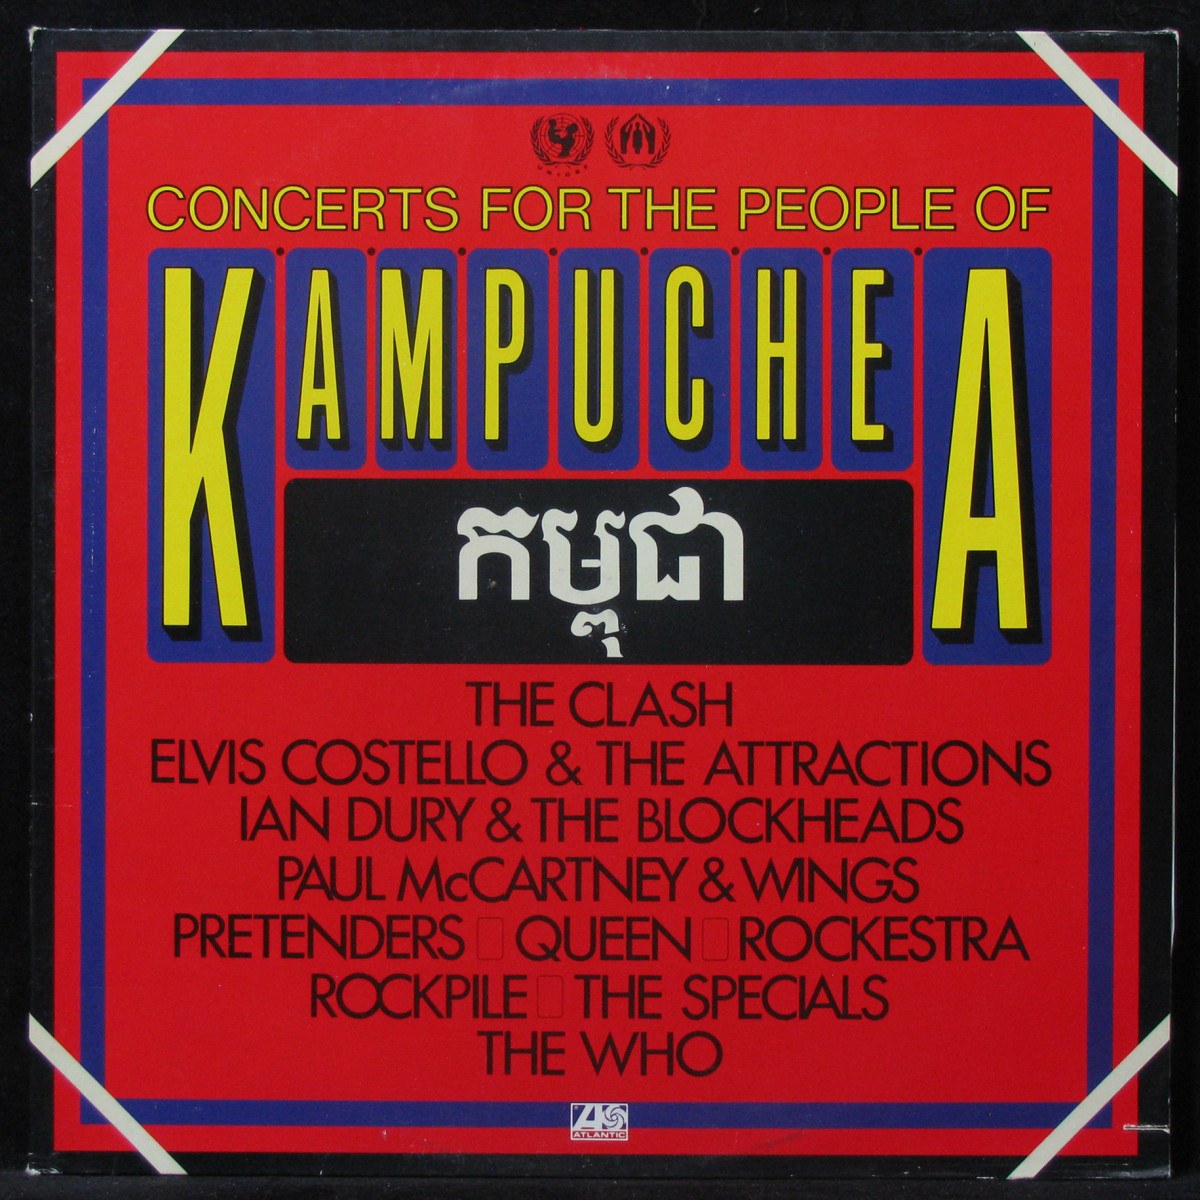 LP V/A — Concerts For The People Of Kampuchea (2LP) фото